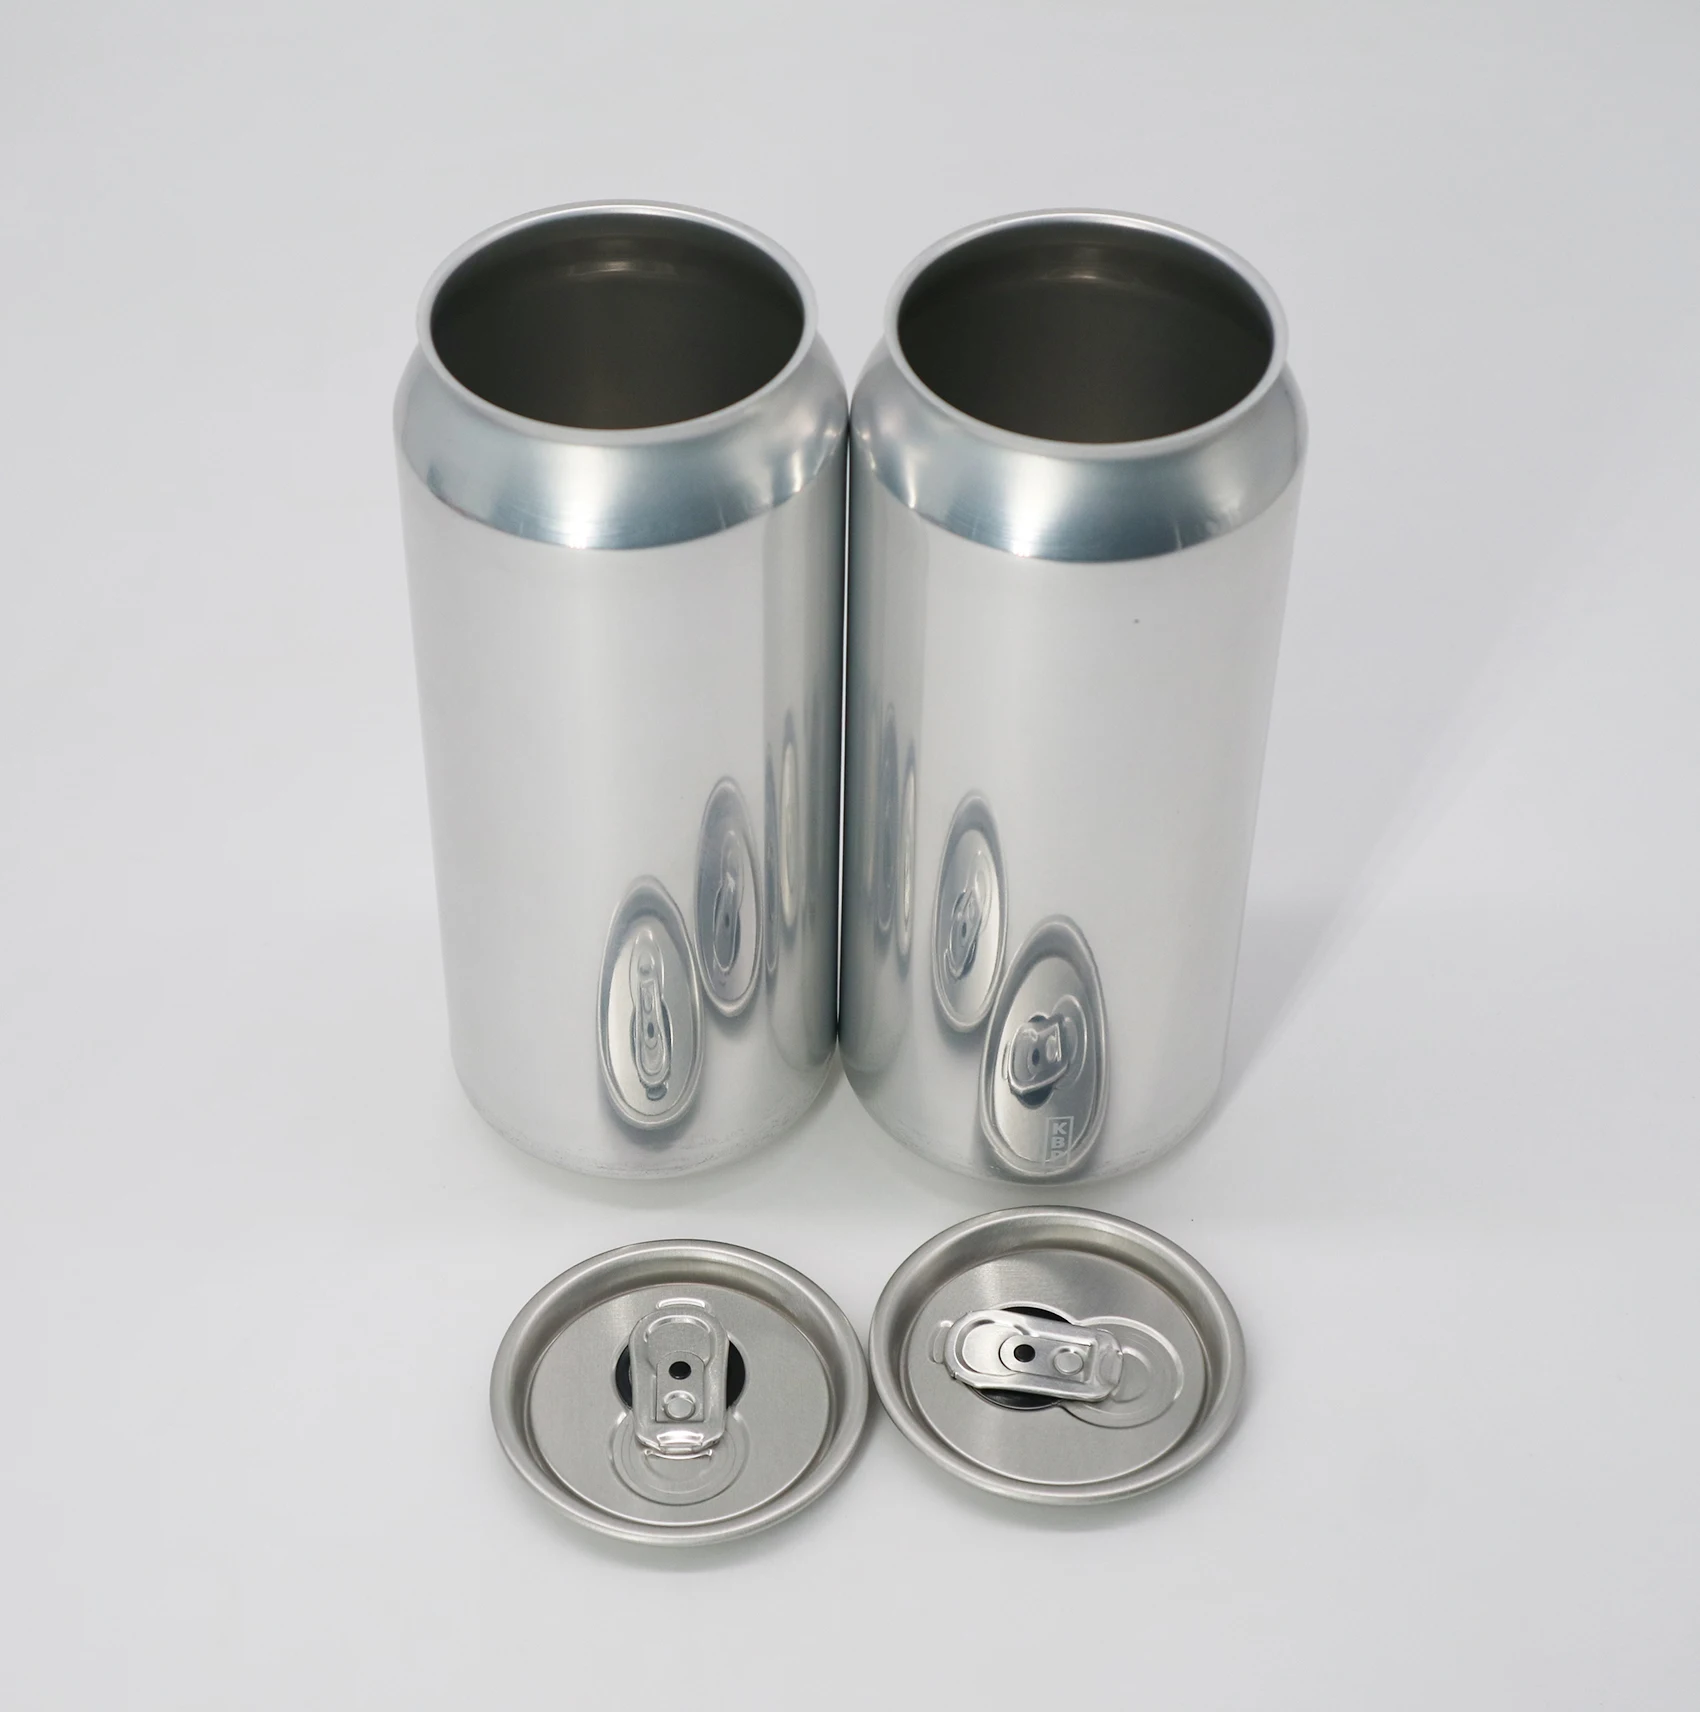 aluminum cans for beer/soda/energy drink/coffee/sparkling water